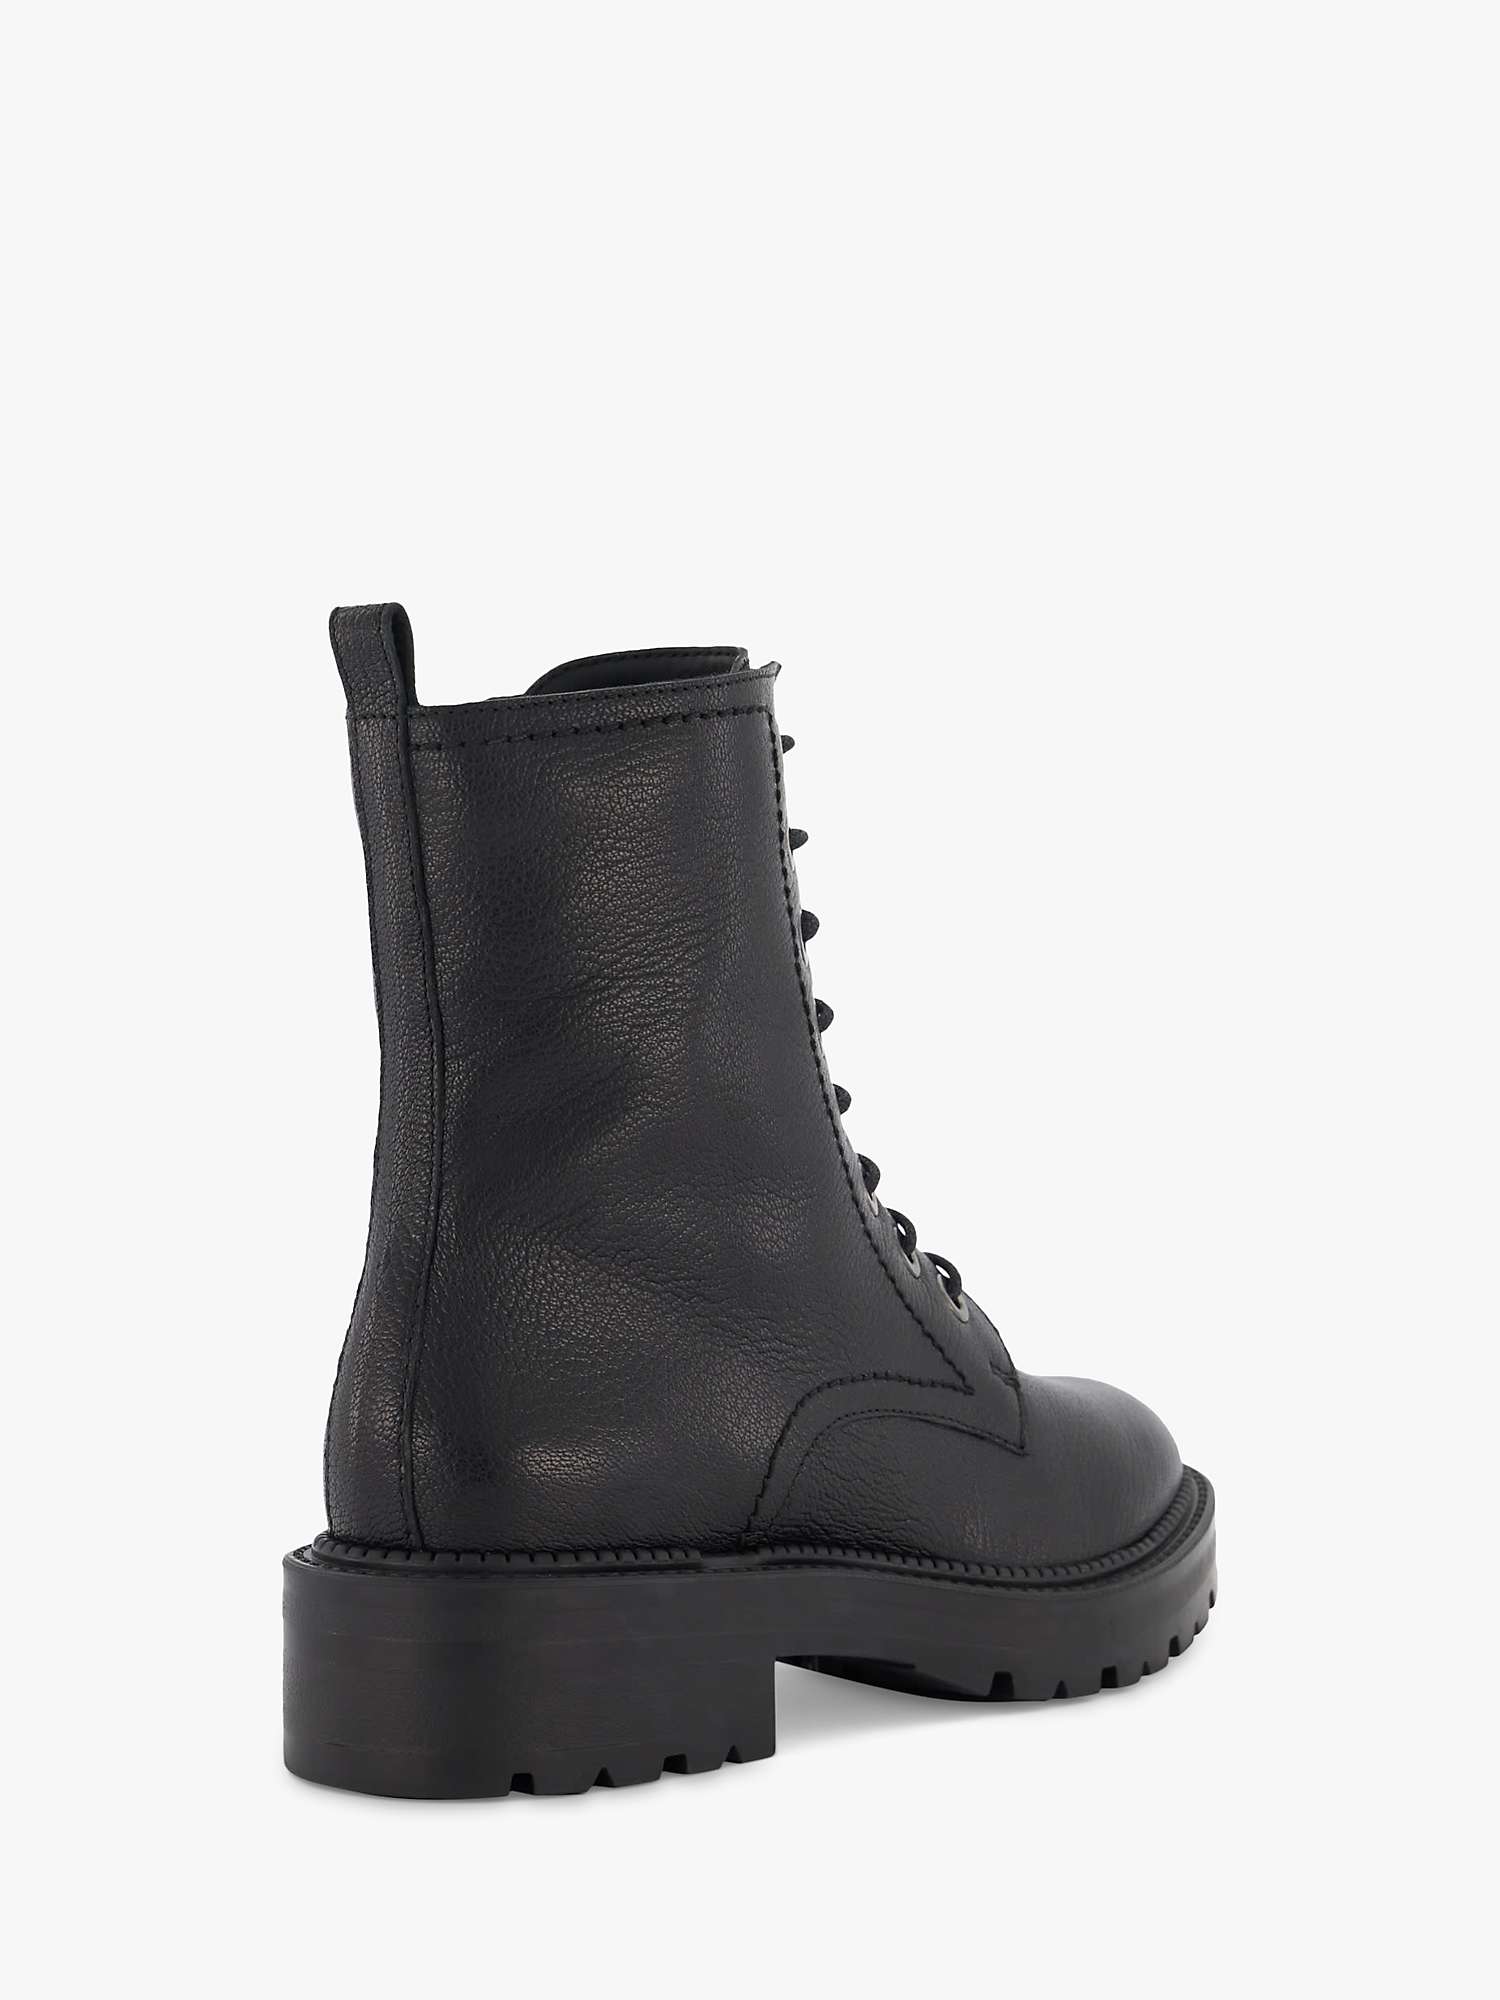 Buy Dune Press Leather Cleated Hiker Boots, Black Online at johnlewis.com